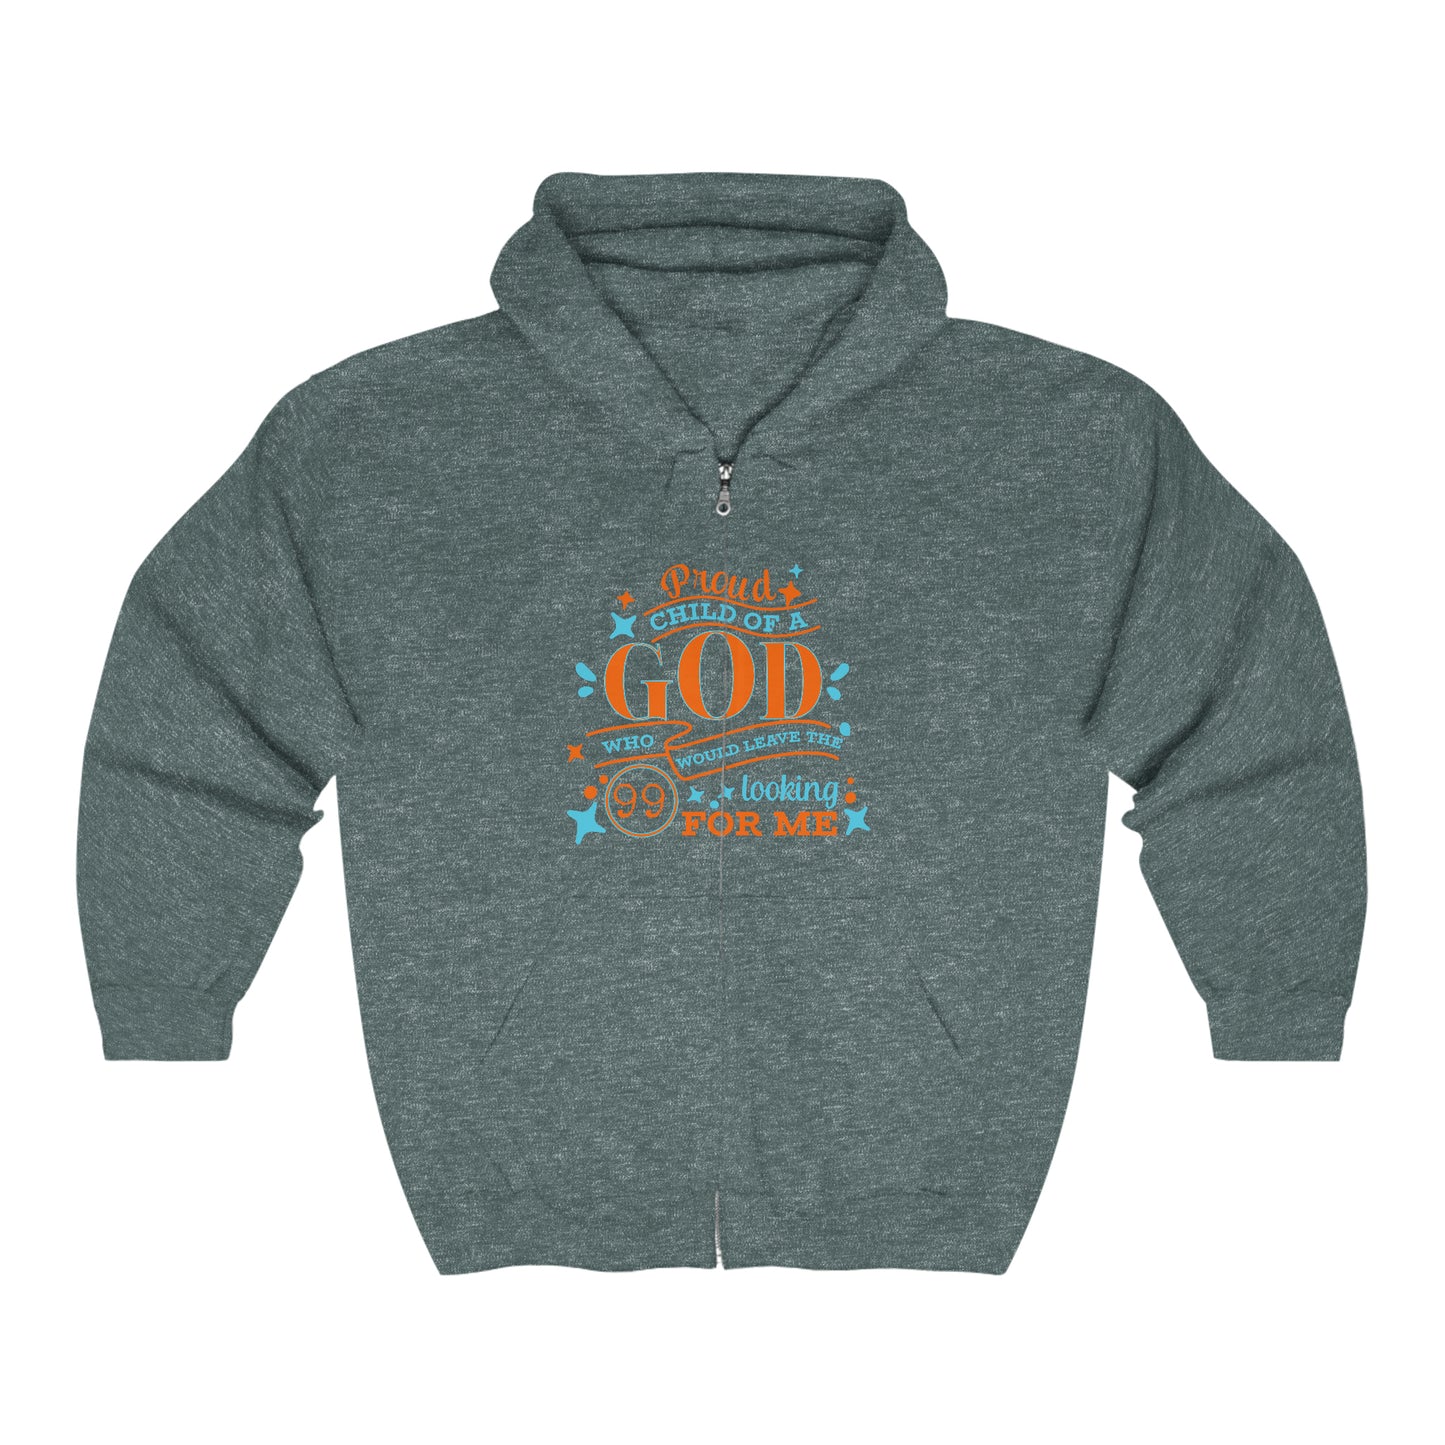 Proud Child Of A God Who Would Leave The 99 Looking For Me Unisex Heavy Blend Full Zip Hooded Sweatshirt